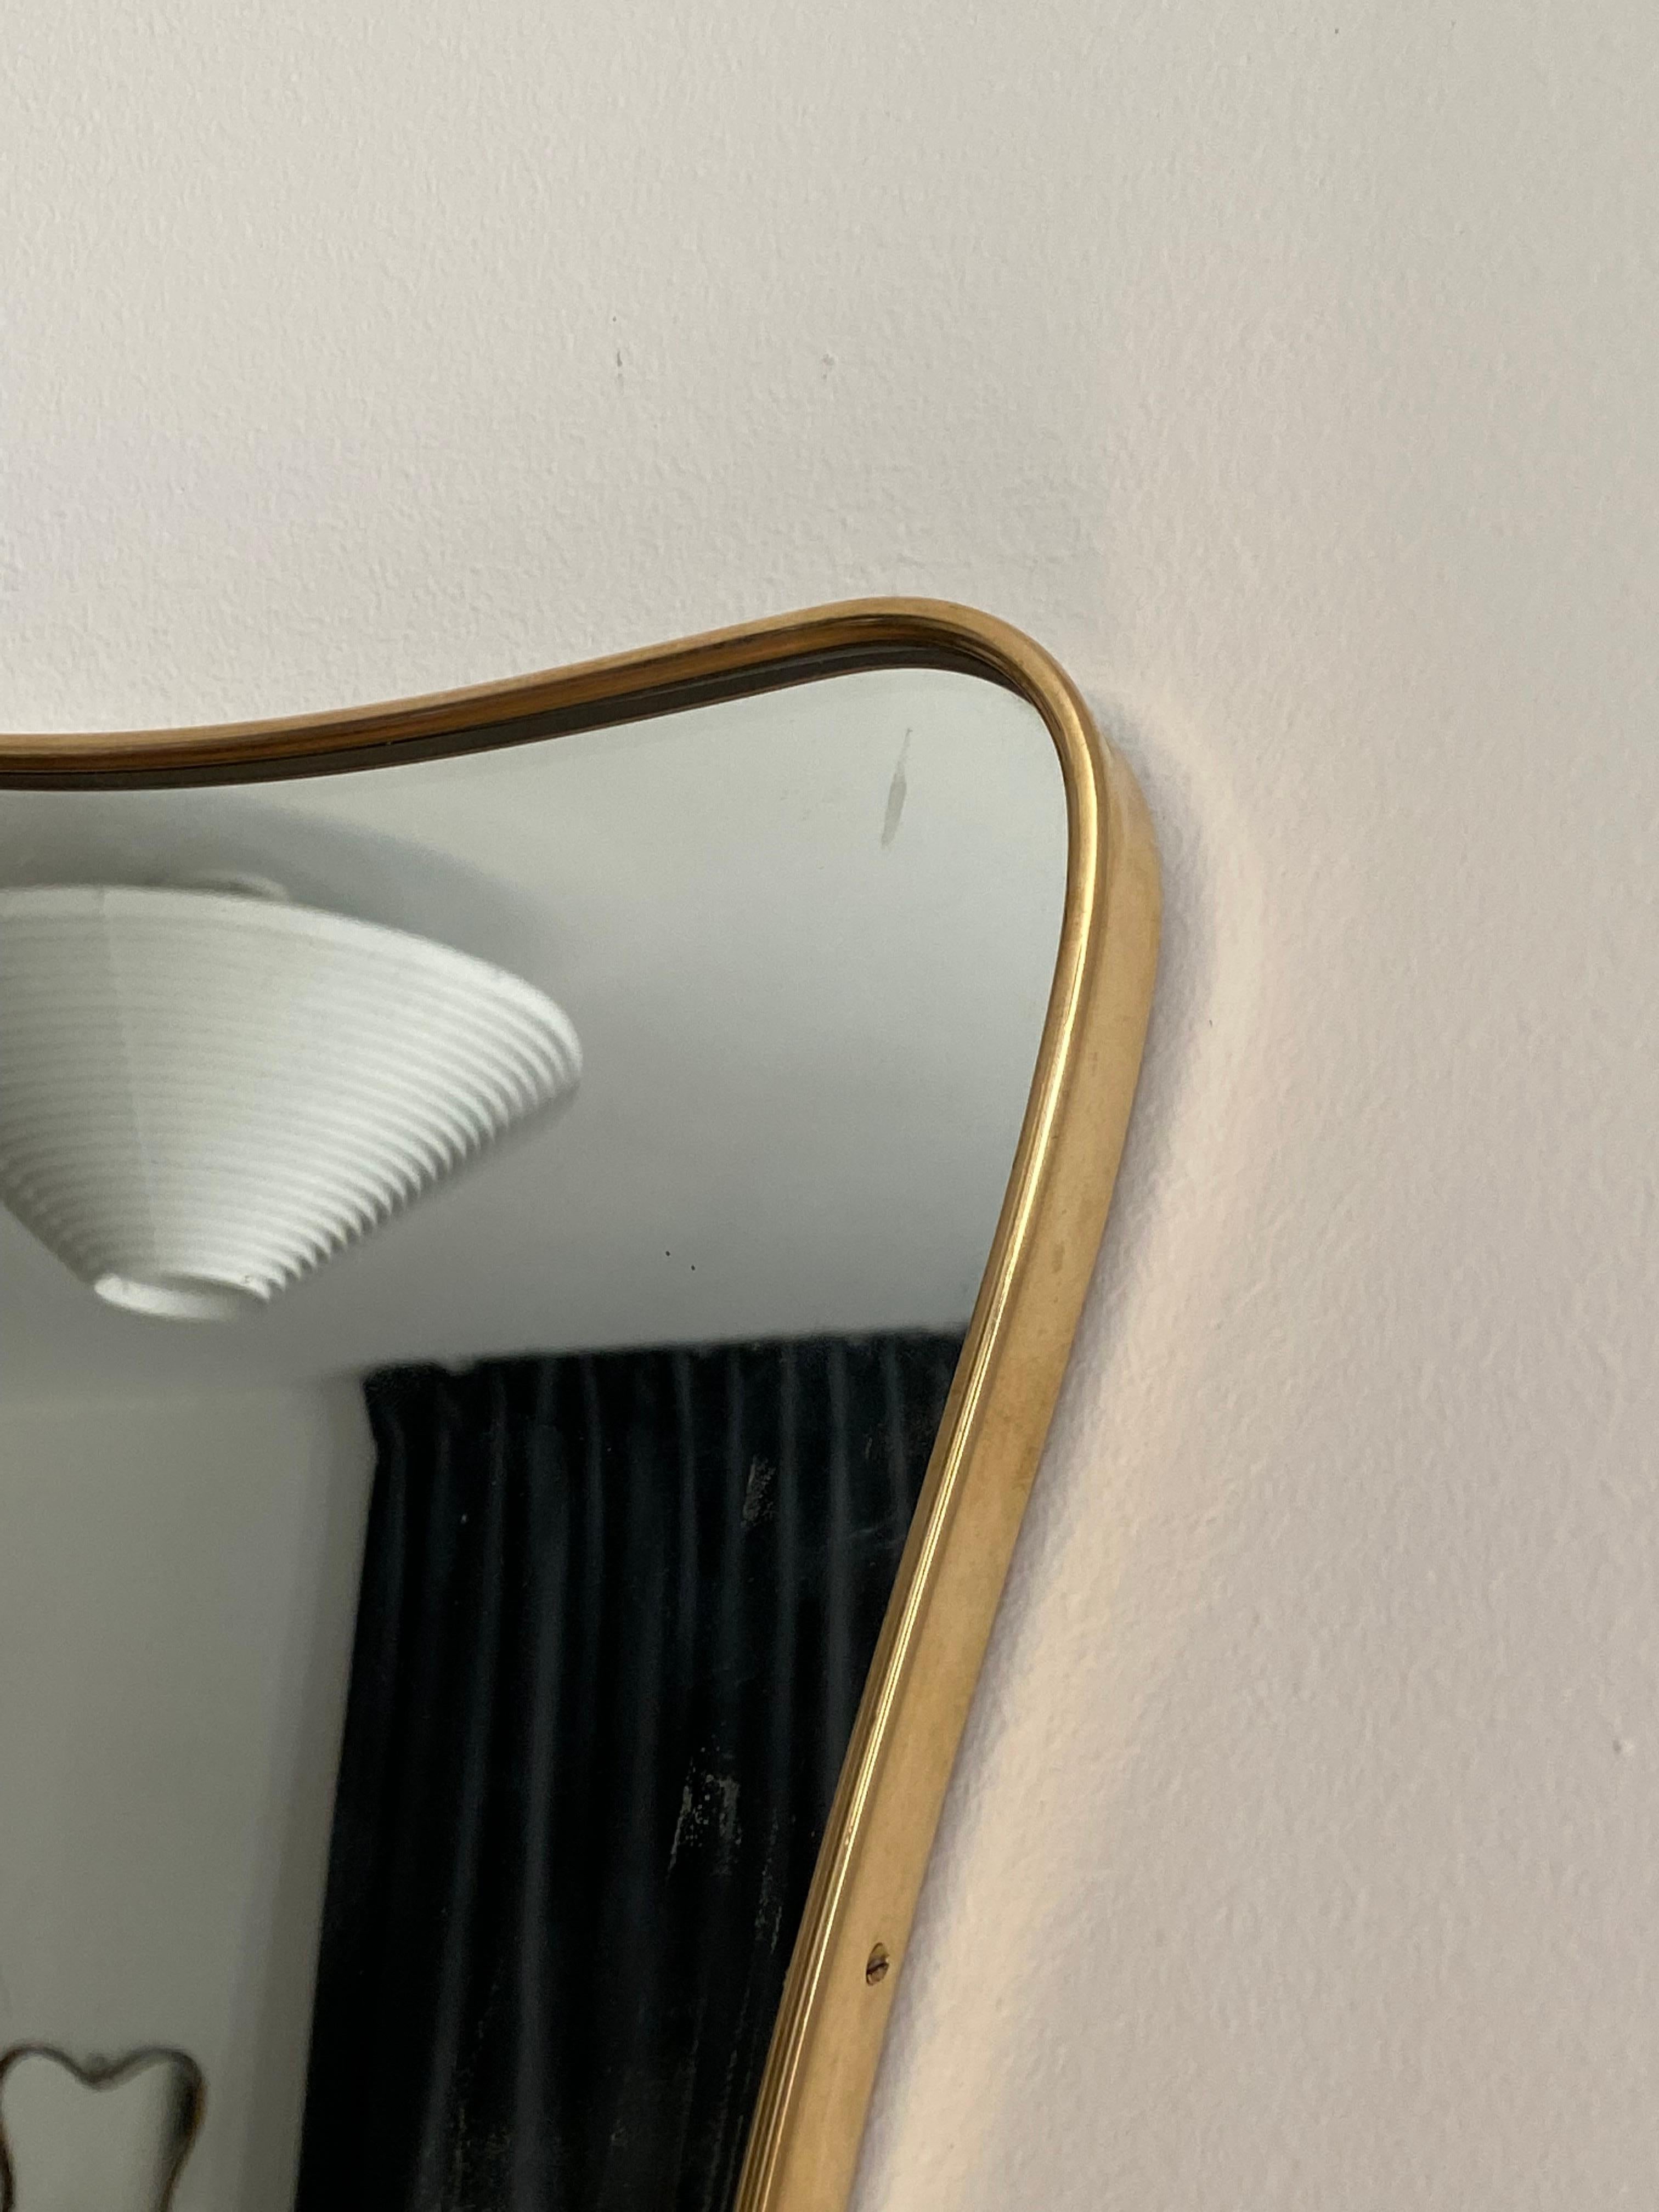 A small organic wall mirror, produced in Italy, 1950s. Organically cut mirror glass is framed in ribbon-shaped brass.

Other designers of the period include Gio Ponti, Fontana Arte, Max Ingrand, Franco Albini, and Josef Frank.